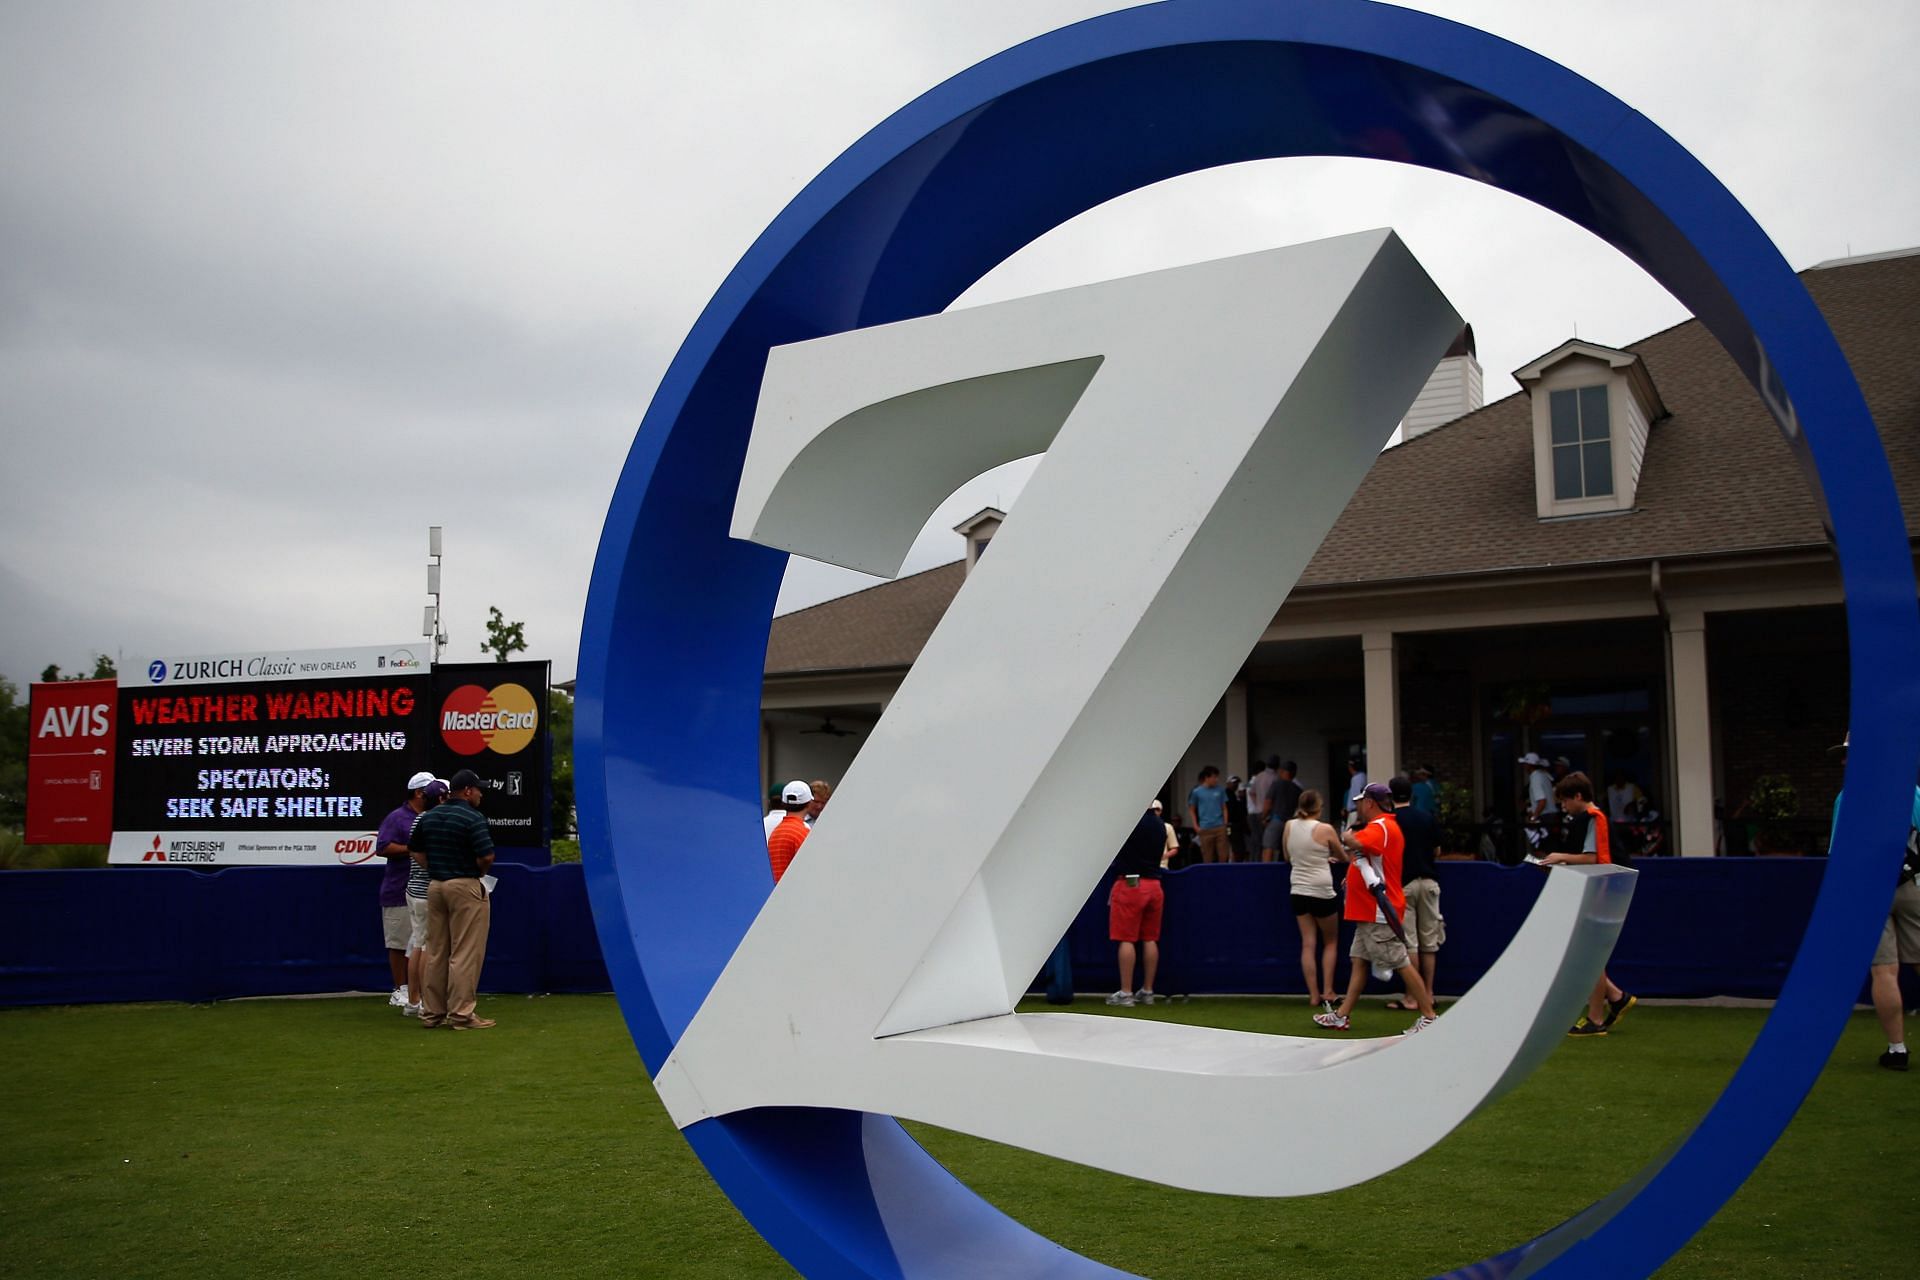 Zurich Classic will take place from Thursday, April 20 to Sunday, April 23